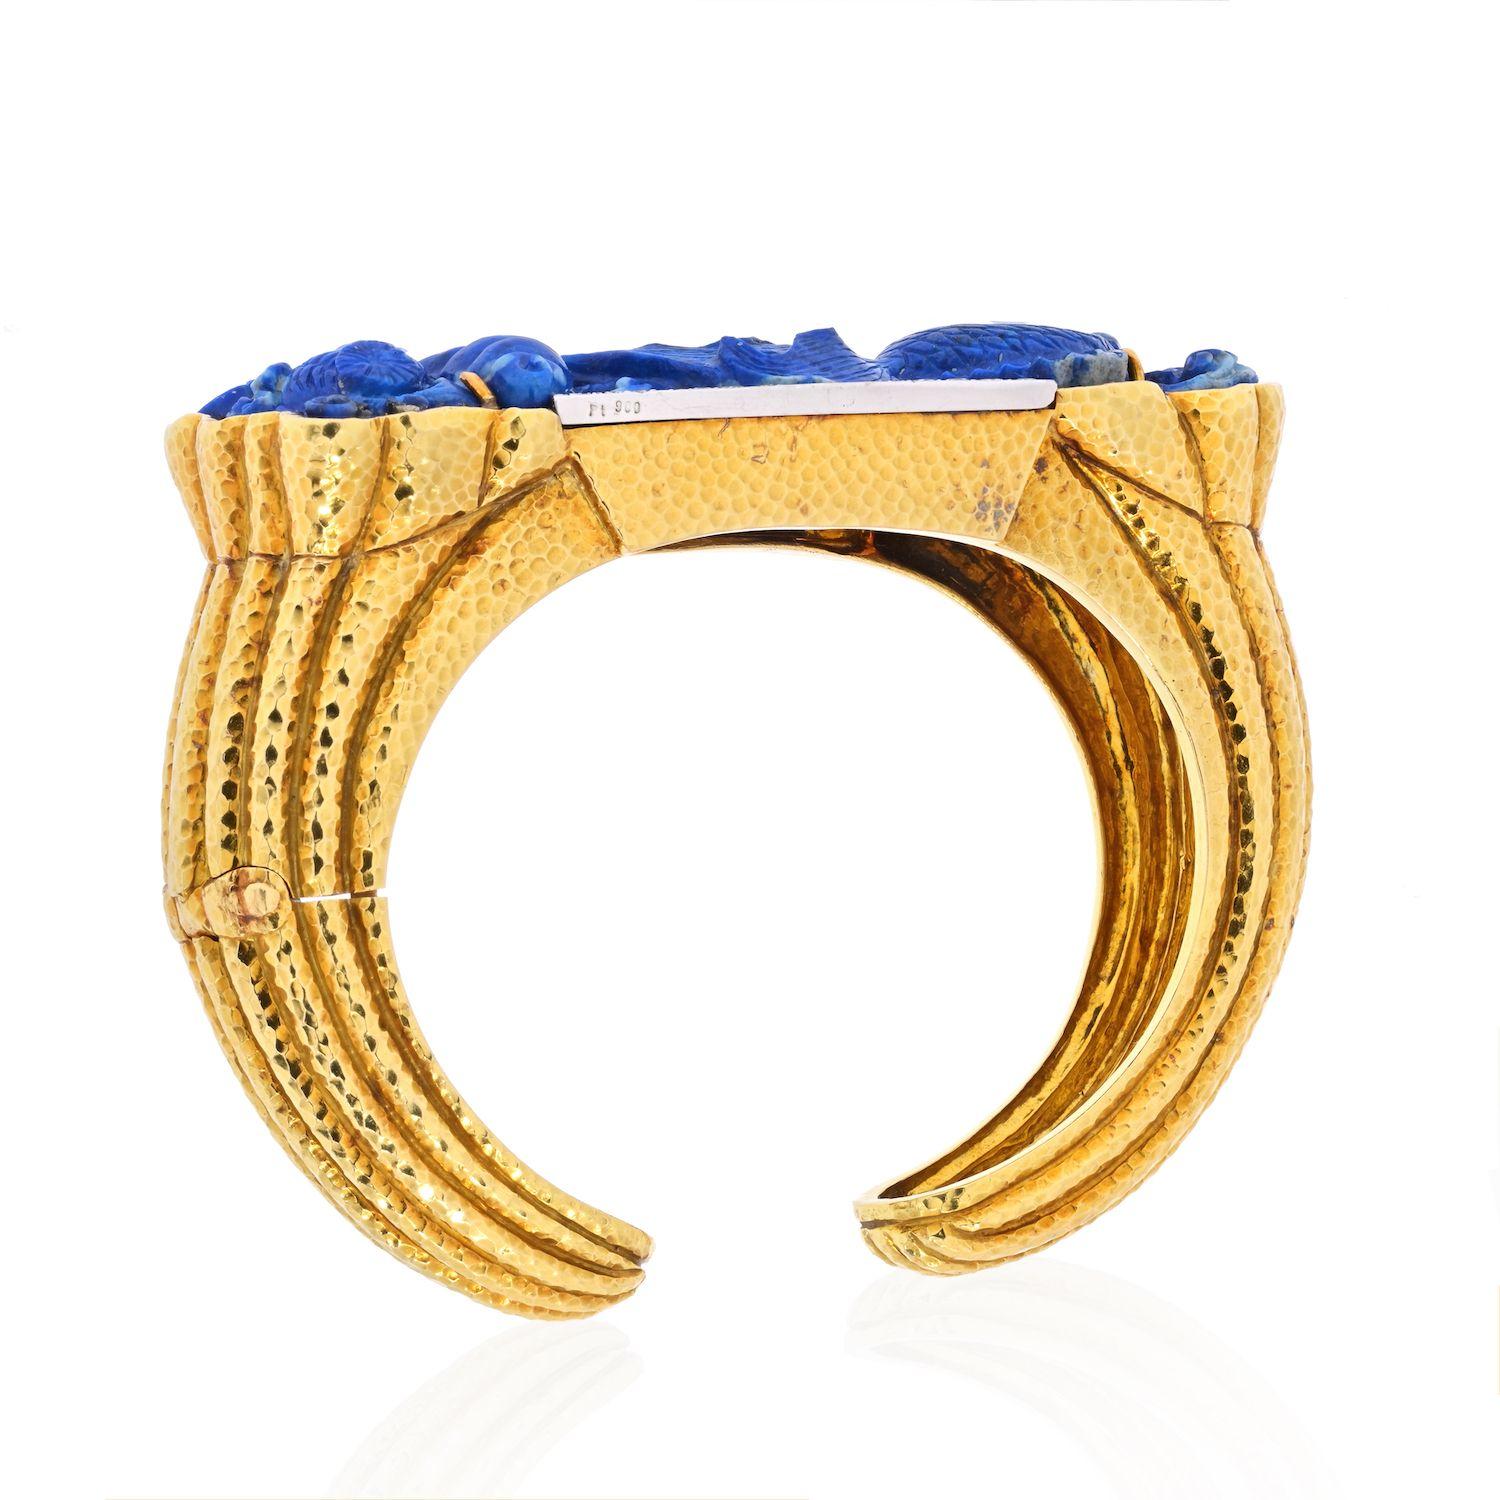 Elegant, stylish and colorful bracelet created by David Webb in the 1980s. Made of carved lapis lazuli, 18 karat yellow gold and accented with round brilliant cut diamonds (F-G color, VS clarity, total weight approximately 0.55 carat). 

The